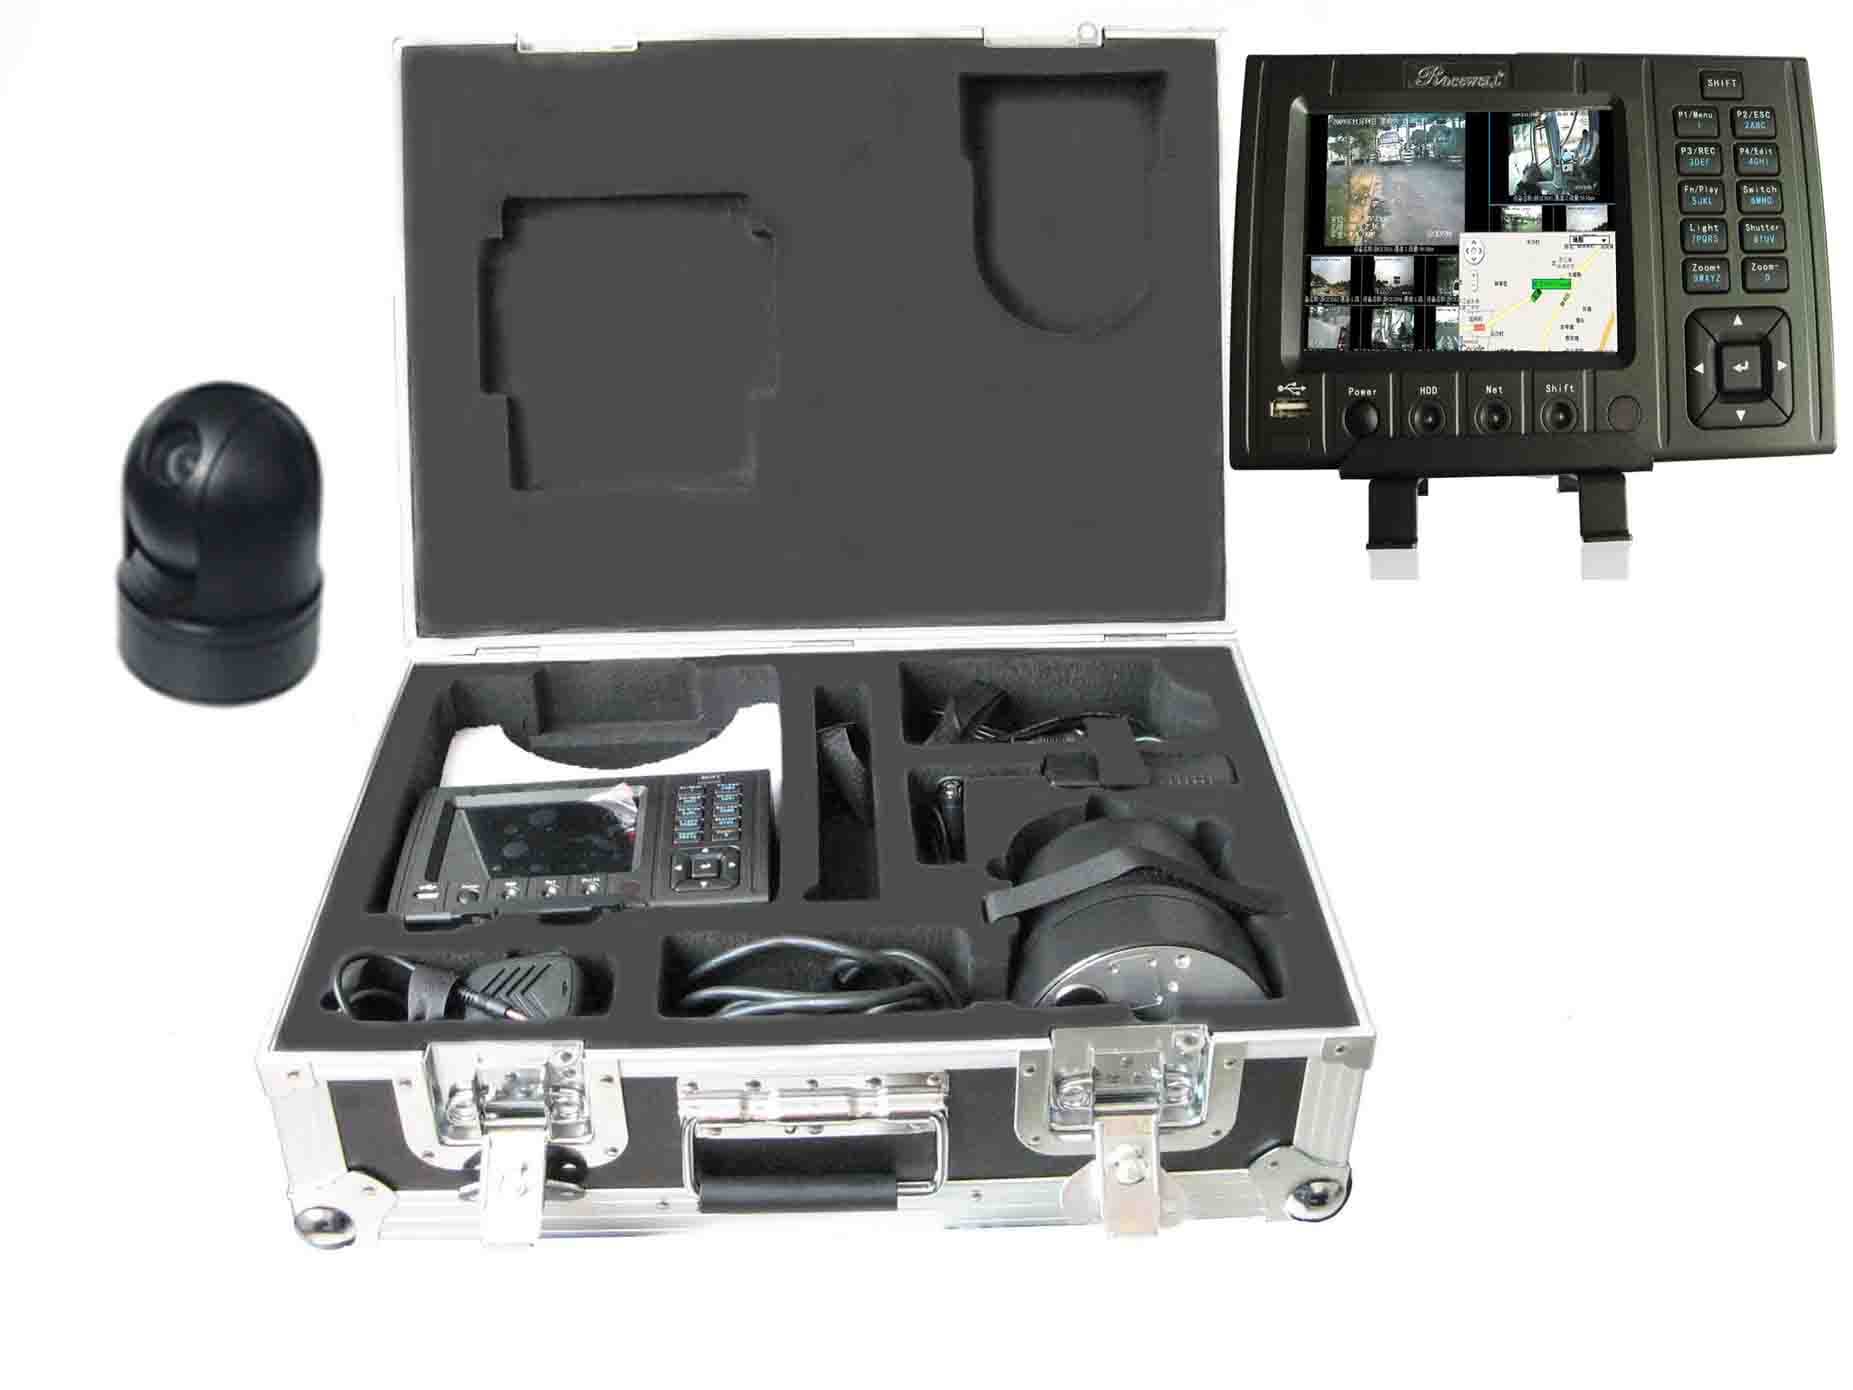 3G GPS H. 264 Realtime Wireless Remote Monitor Mobile DVR Vehicle Dynamic Evidence to Obtain